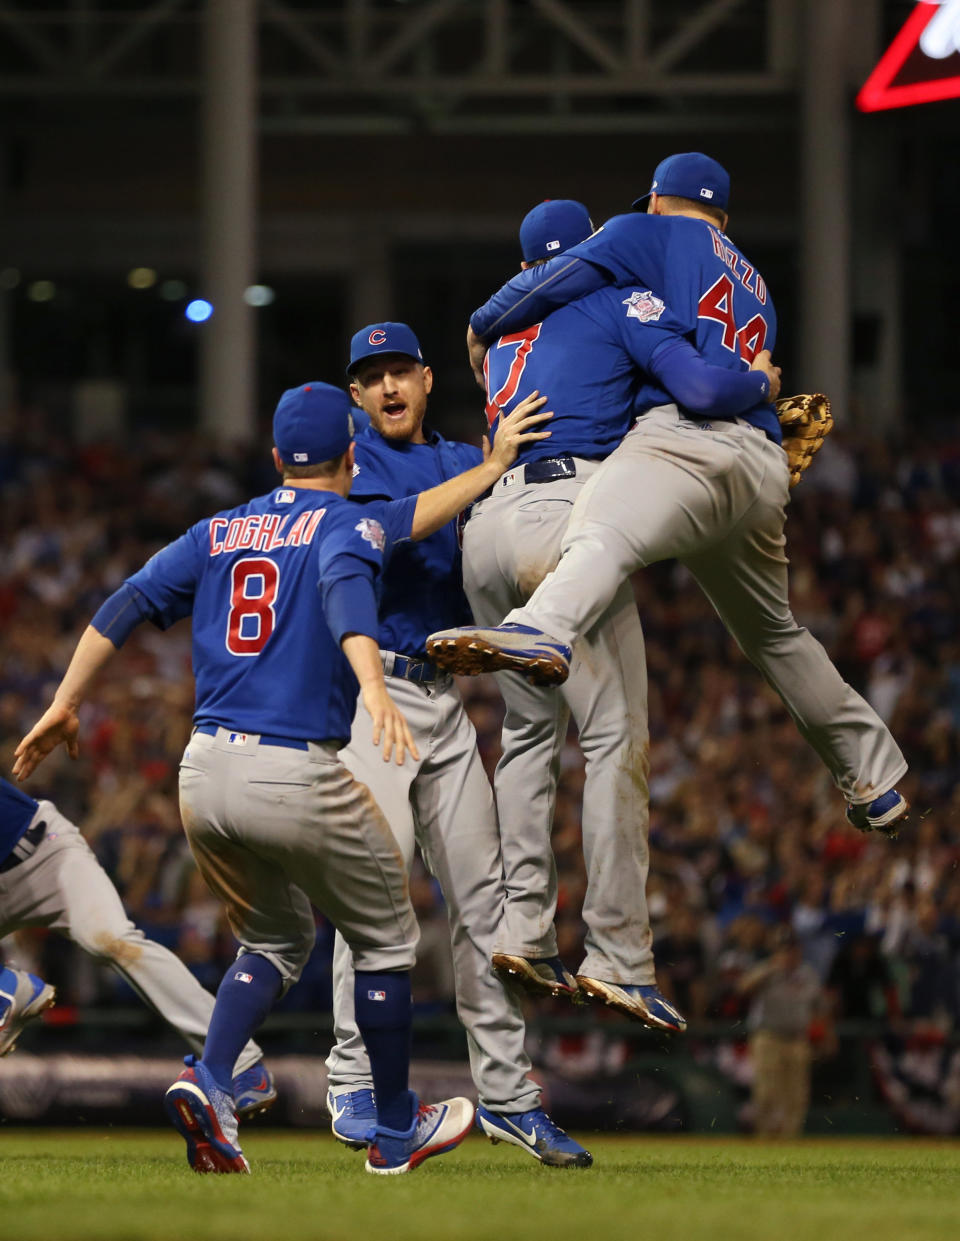 CLEVELAND, OH - NOVEMBER 2:  Chris Coghlan #8, Kris Bryant #17 and Anthony Rizzo # 44 of the Chicago Cubs celebrate after winning Game 7 of the 2016 World Series against the Cleveland Indians at Progressive Field on Wednesday, November 2, 2016 in Cleveland, Ohio. (Photo by Brad Mangin/MLB Photos via Getty Images) 